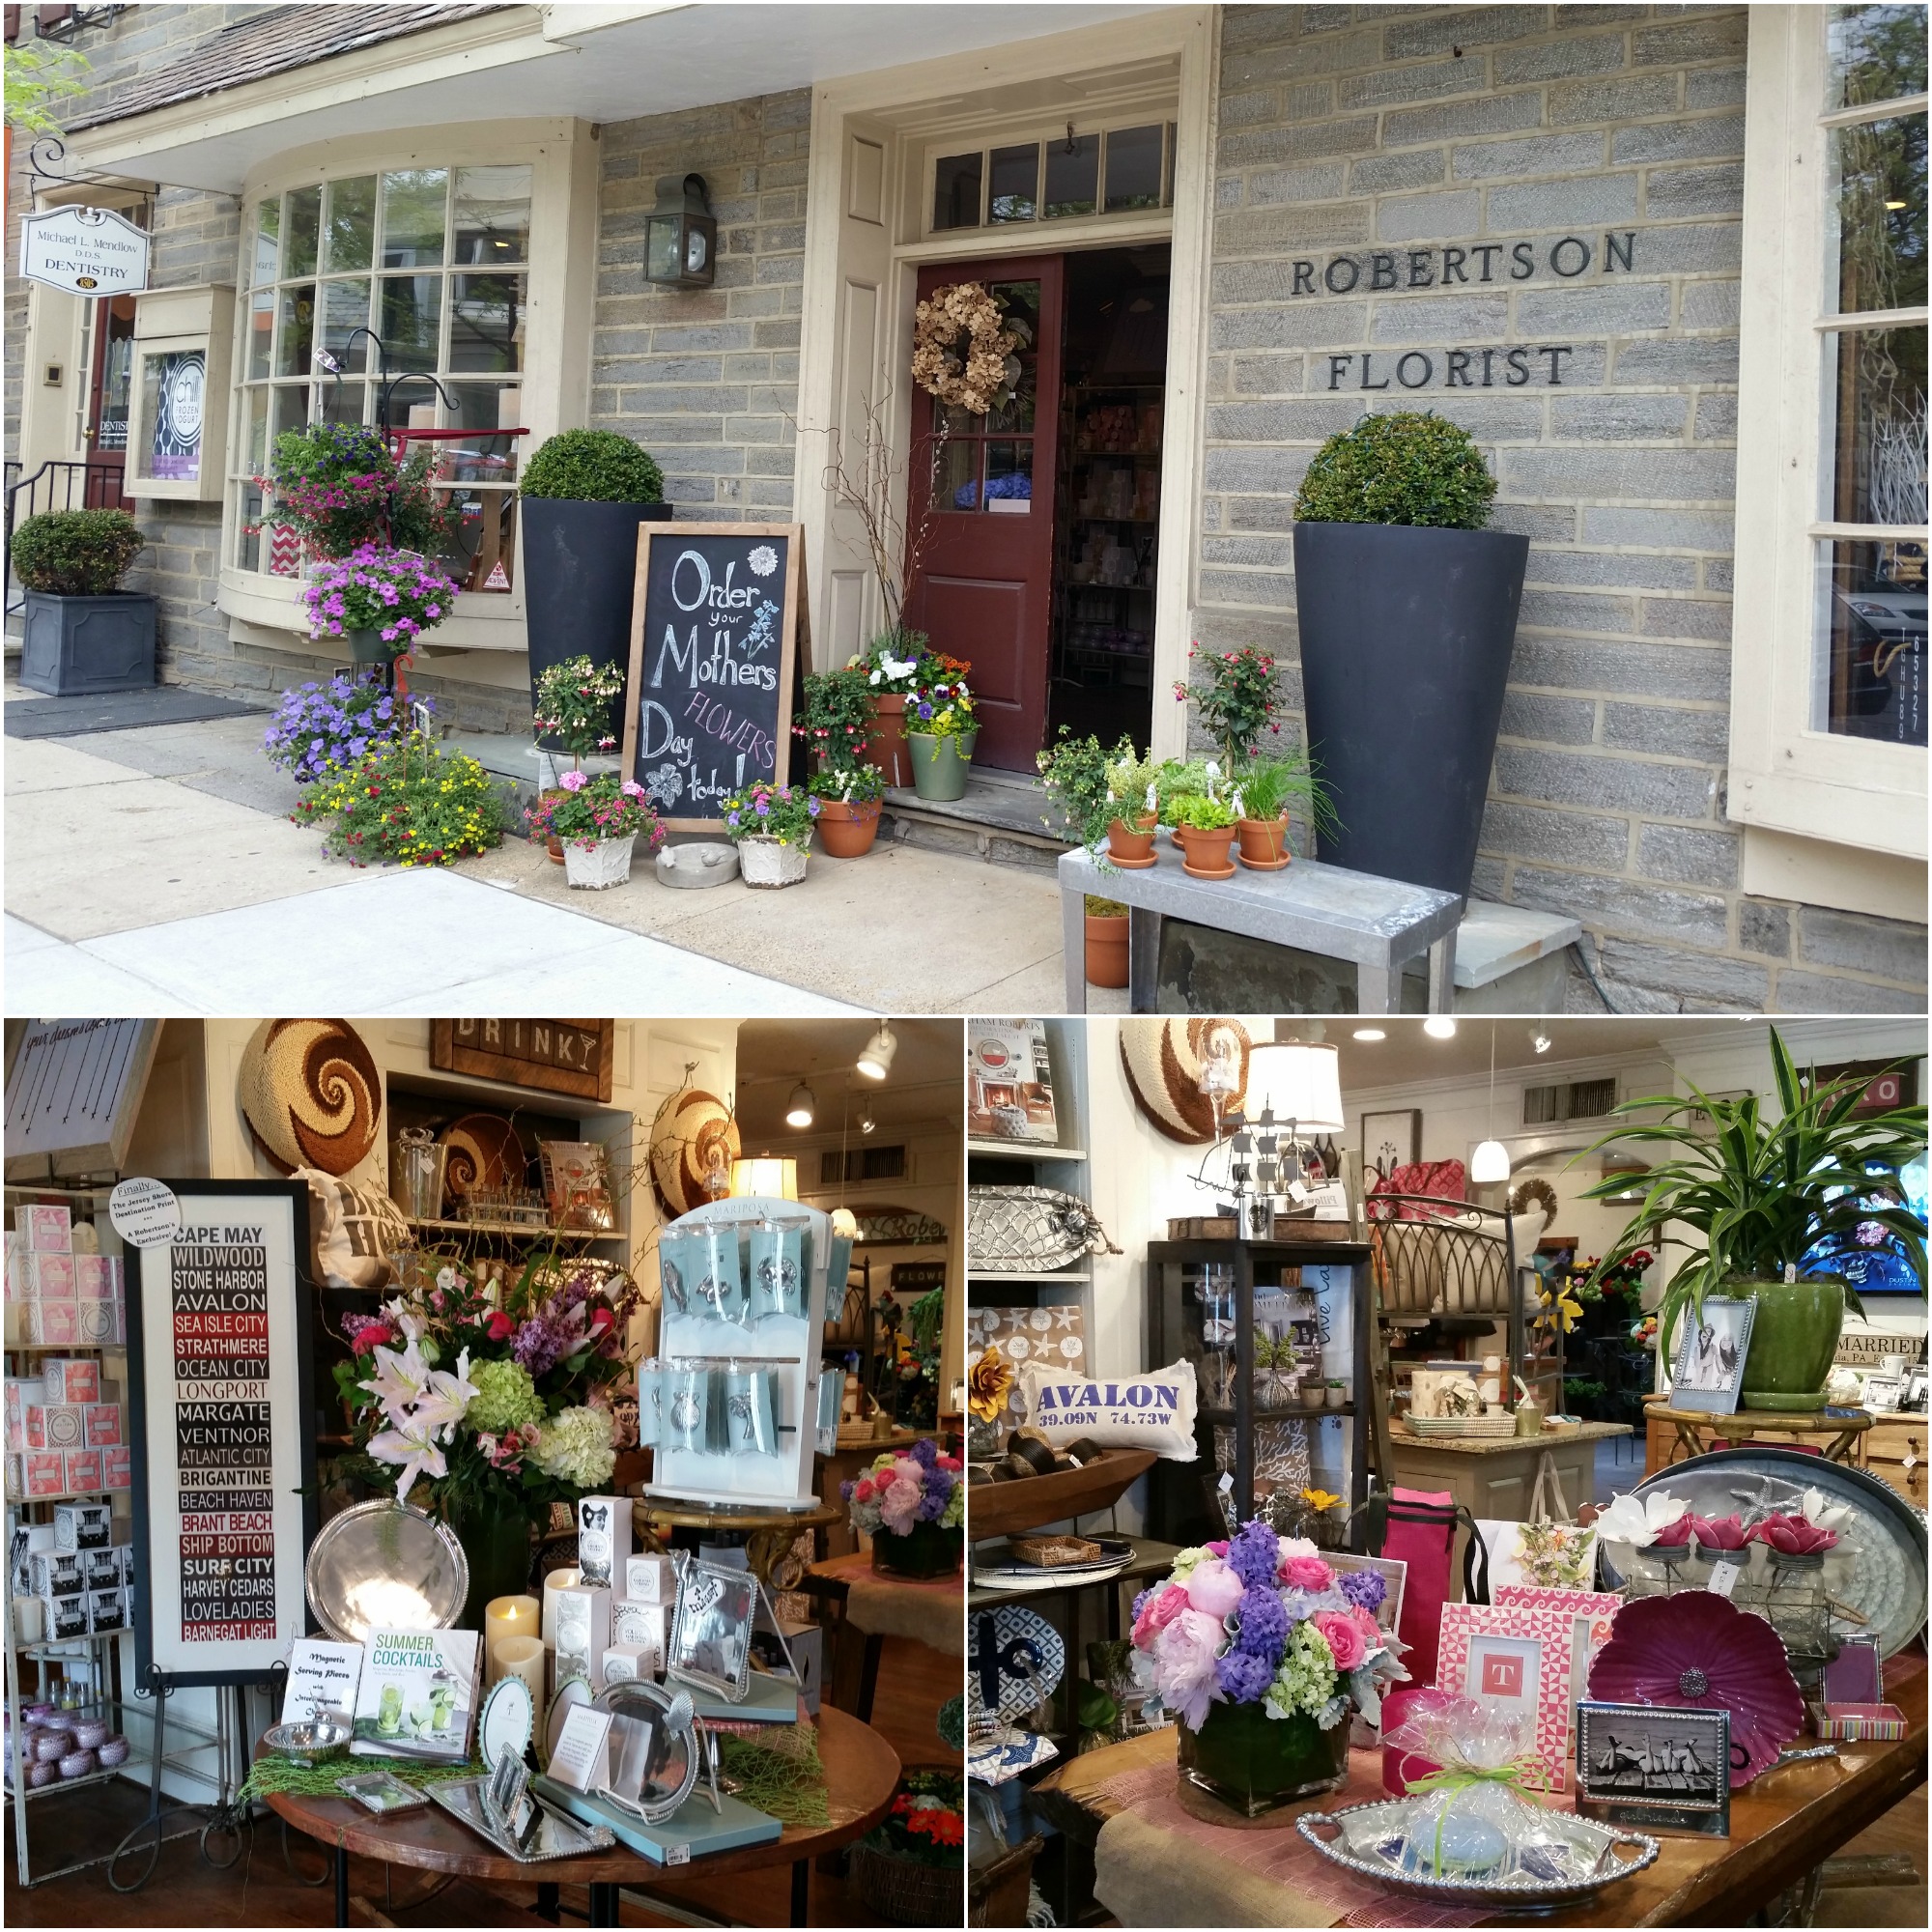 Robertson's Flowers of Chestnut Hill is located at 8501 Germantown Avenue, Philadelphia, PA 19118